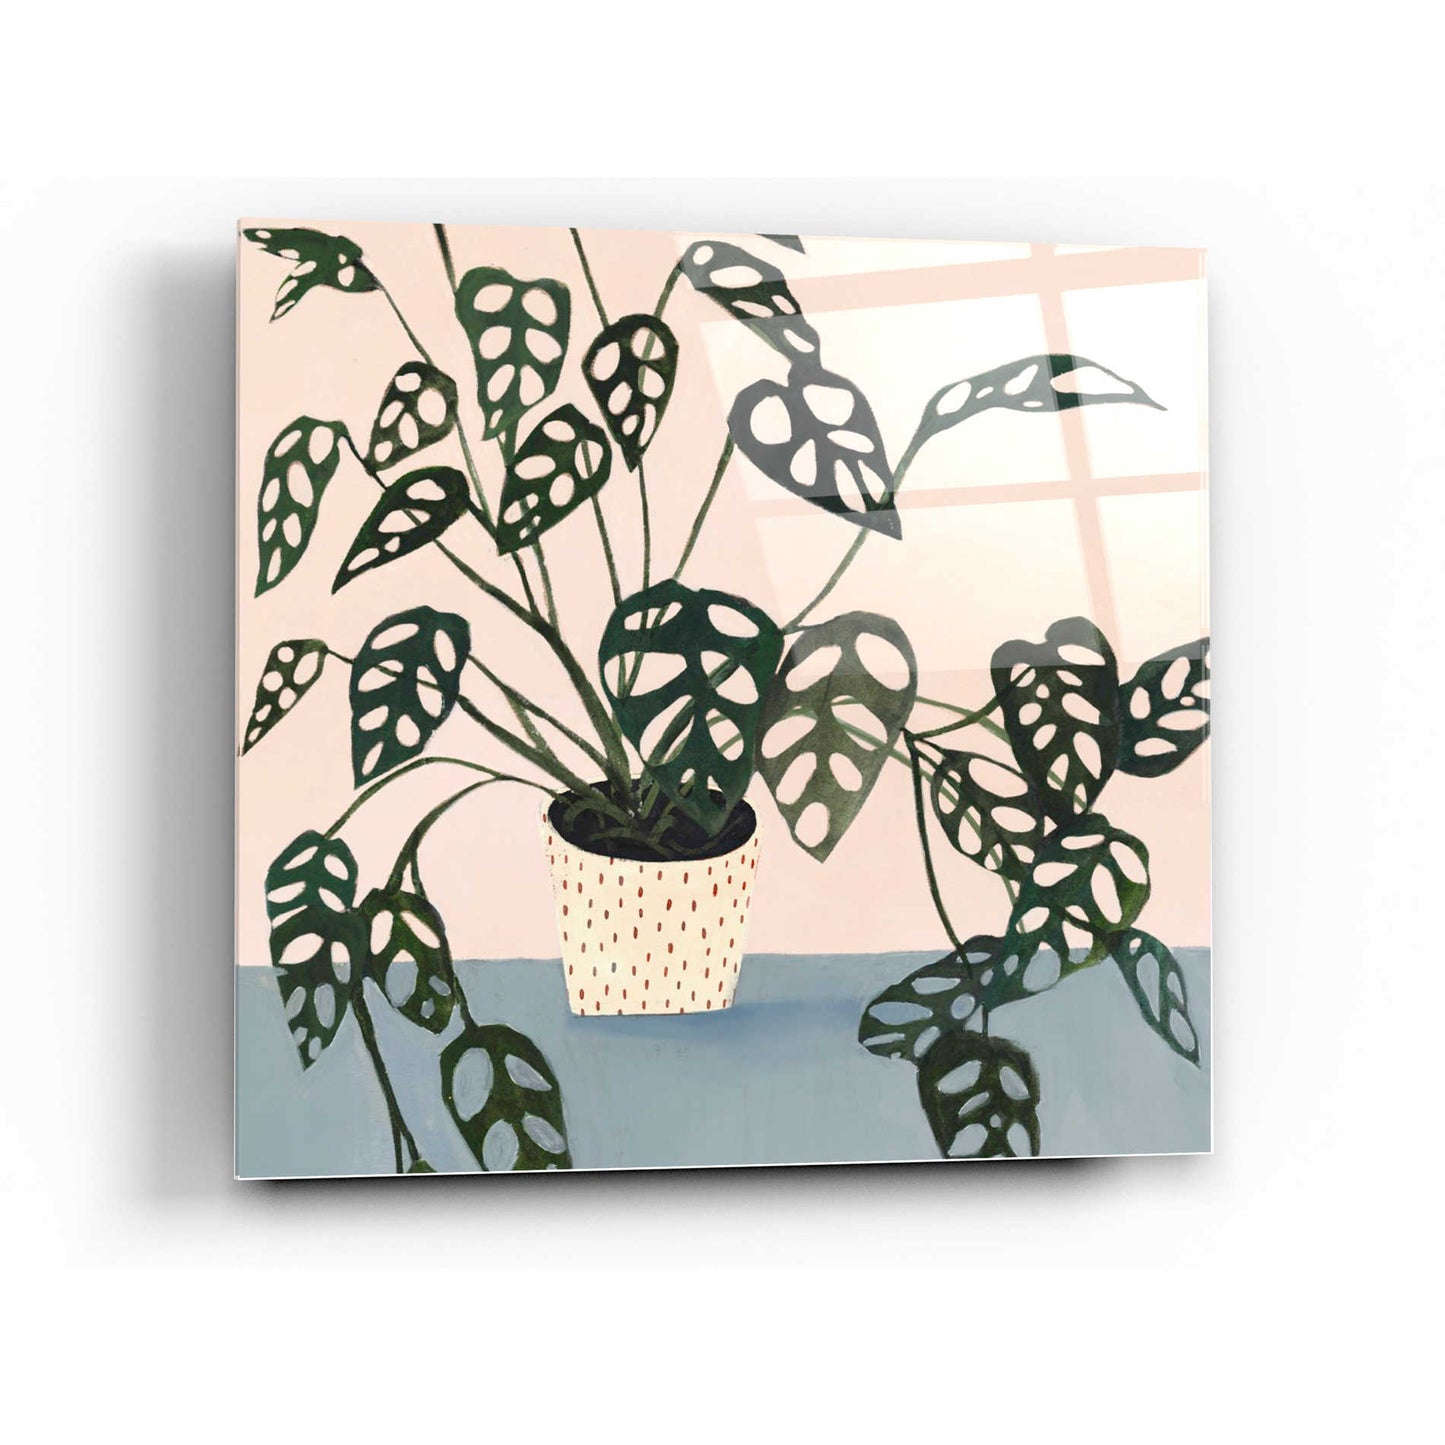 Epic Art 'Houseplant I' by Victoria Borges Acrylic Glass Wall Art,36x36